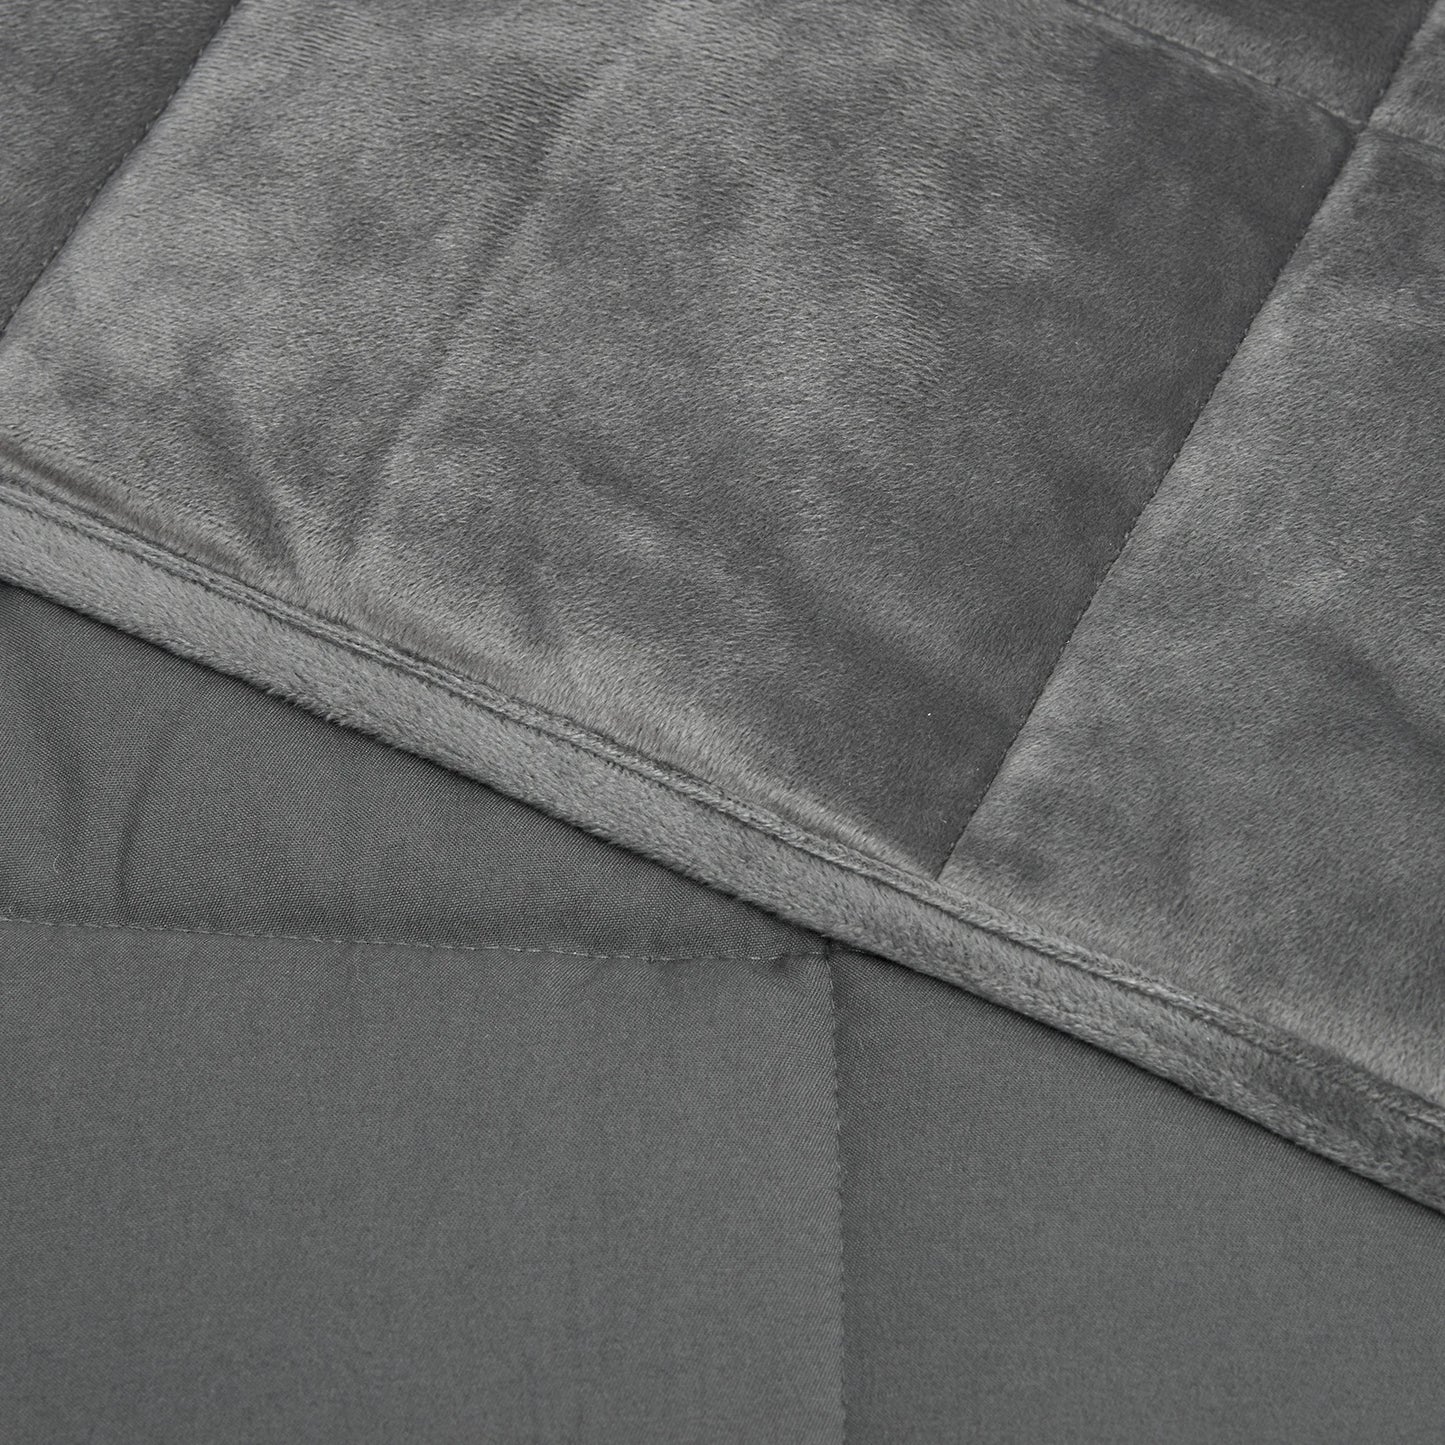 Discover Deep Sleep with Our Luxe Weighted Blanket